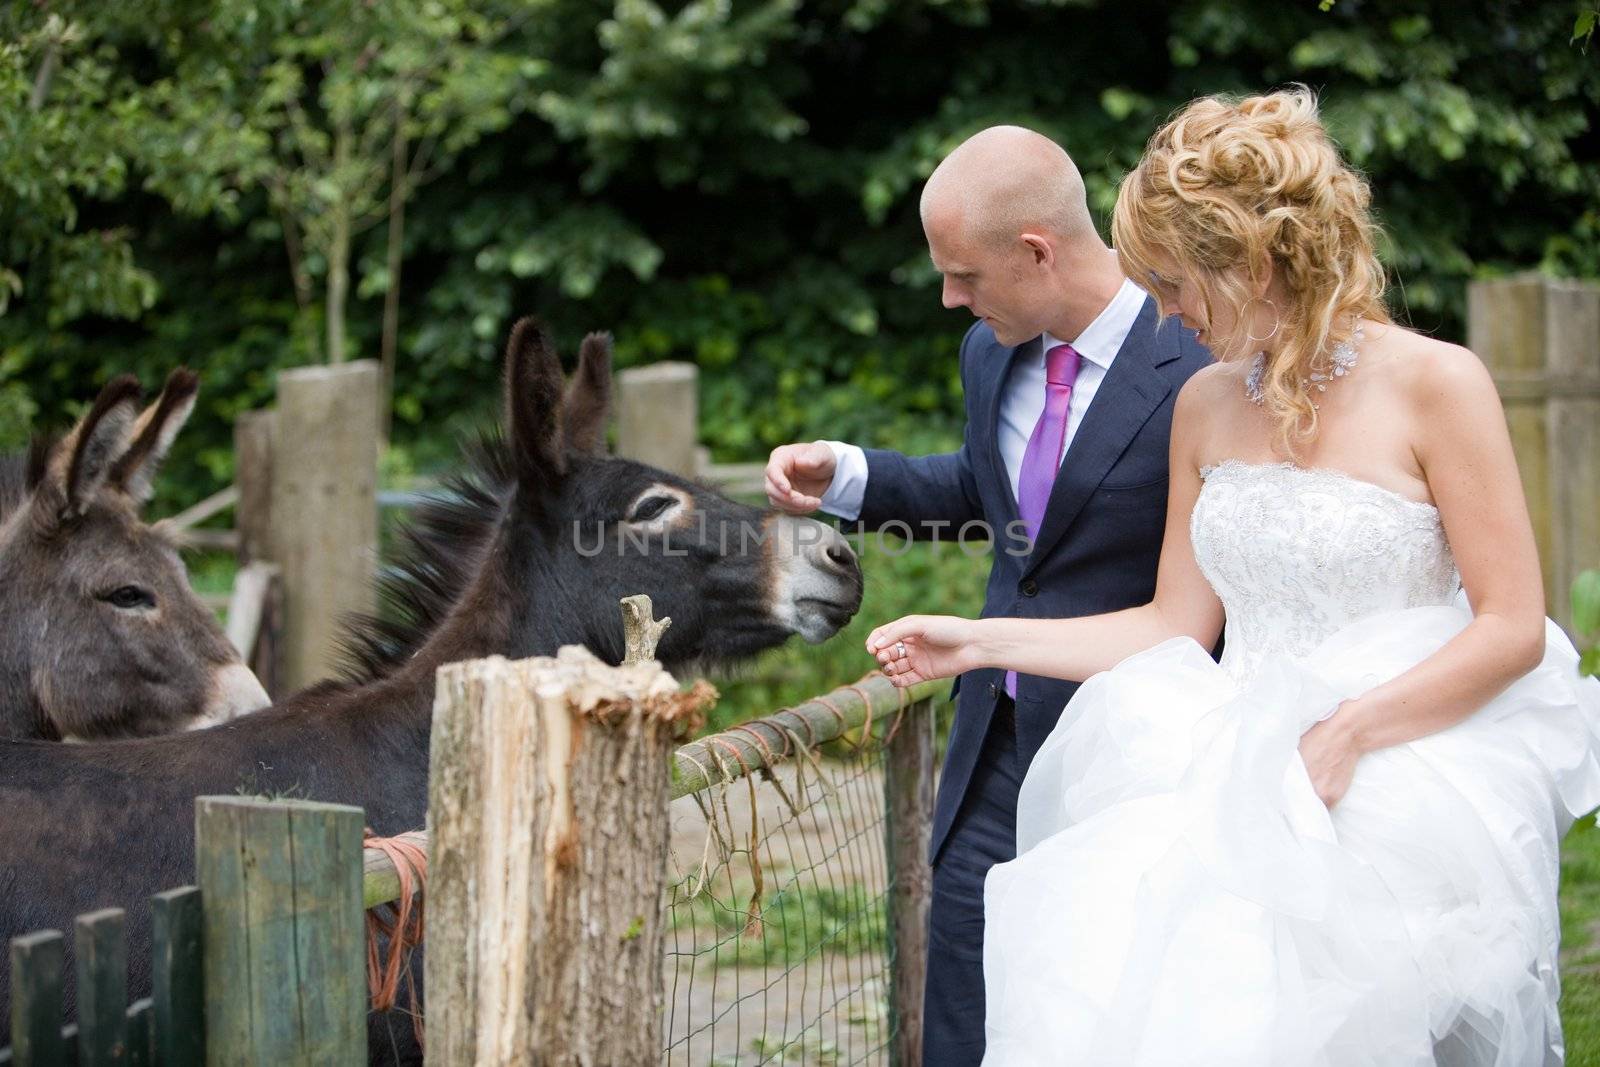 Newly wed couple standing close to a donkey being carefull not to get too close